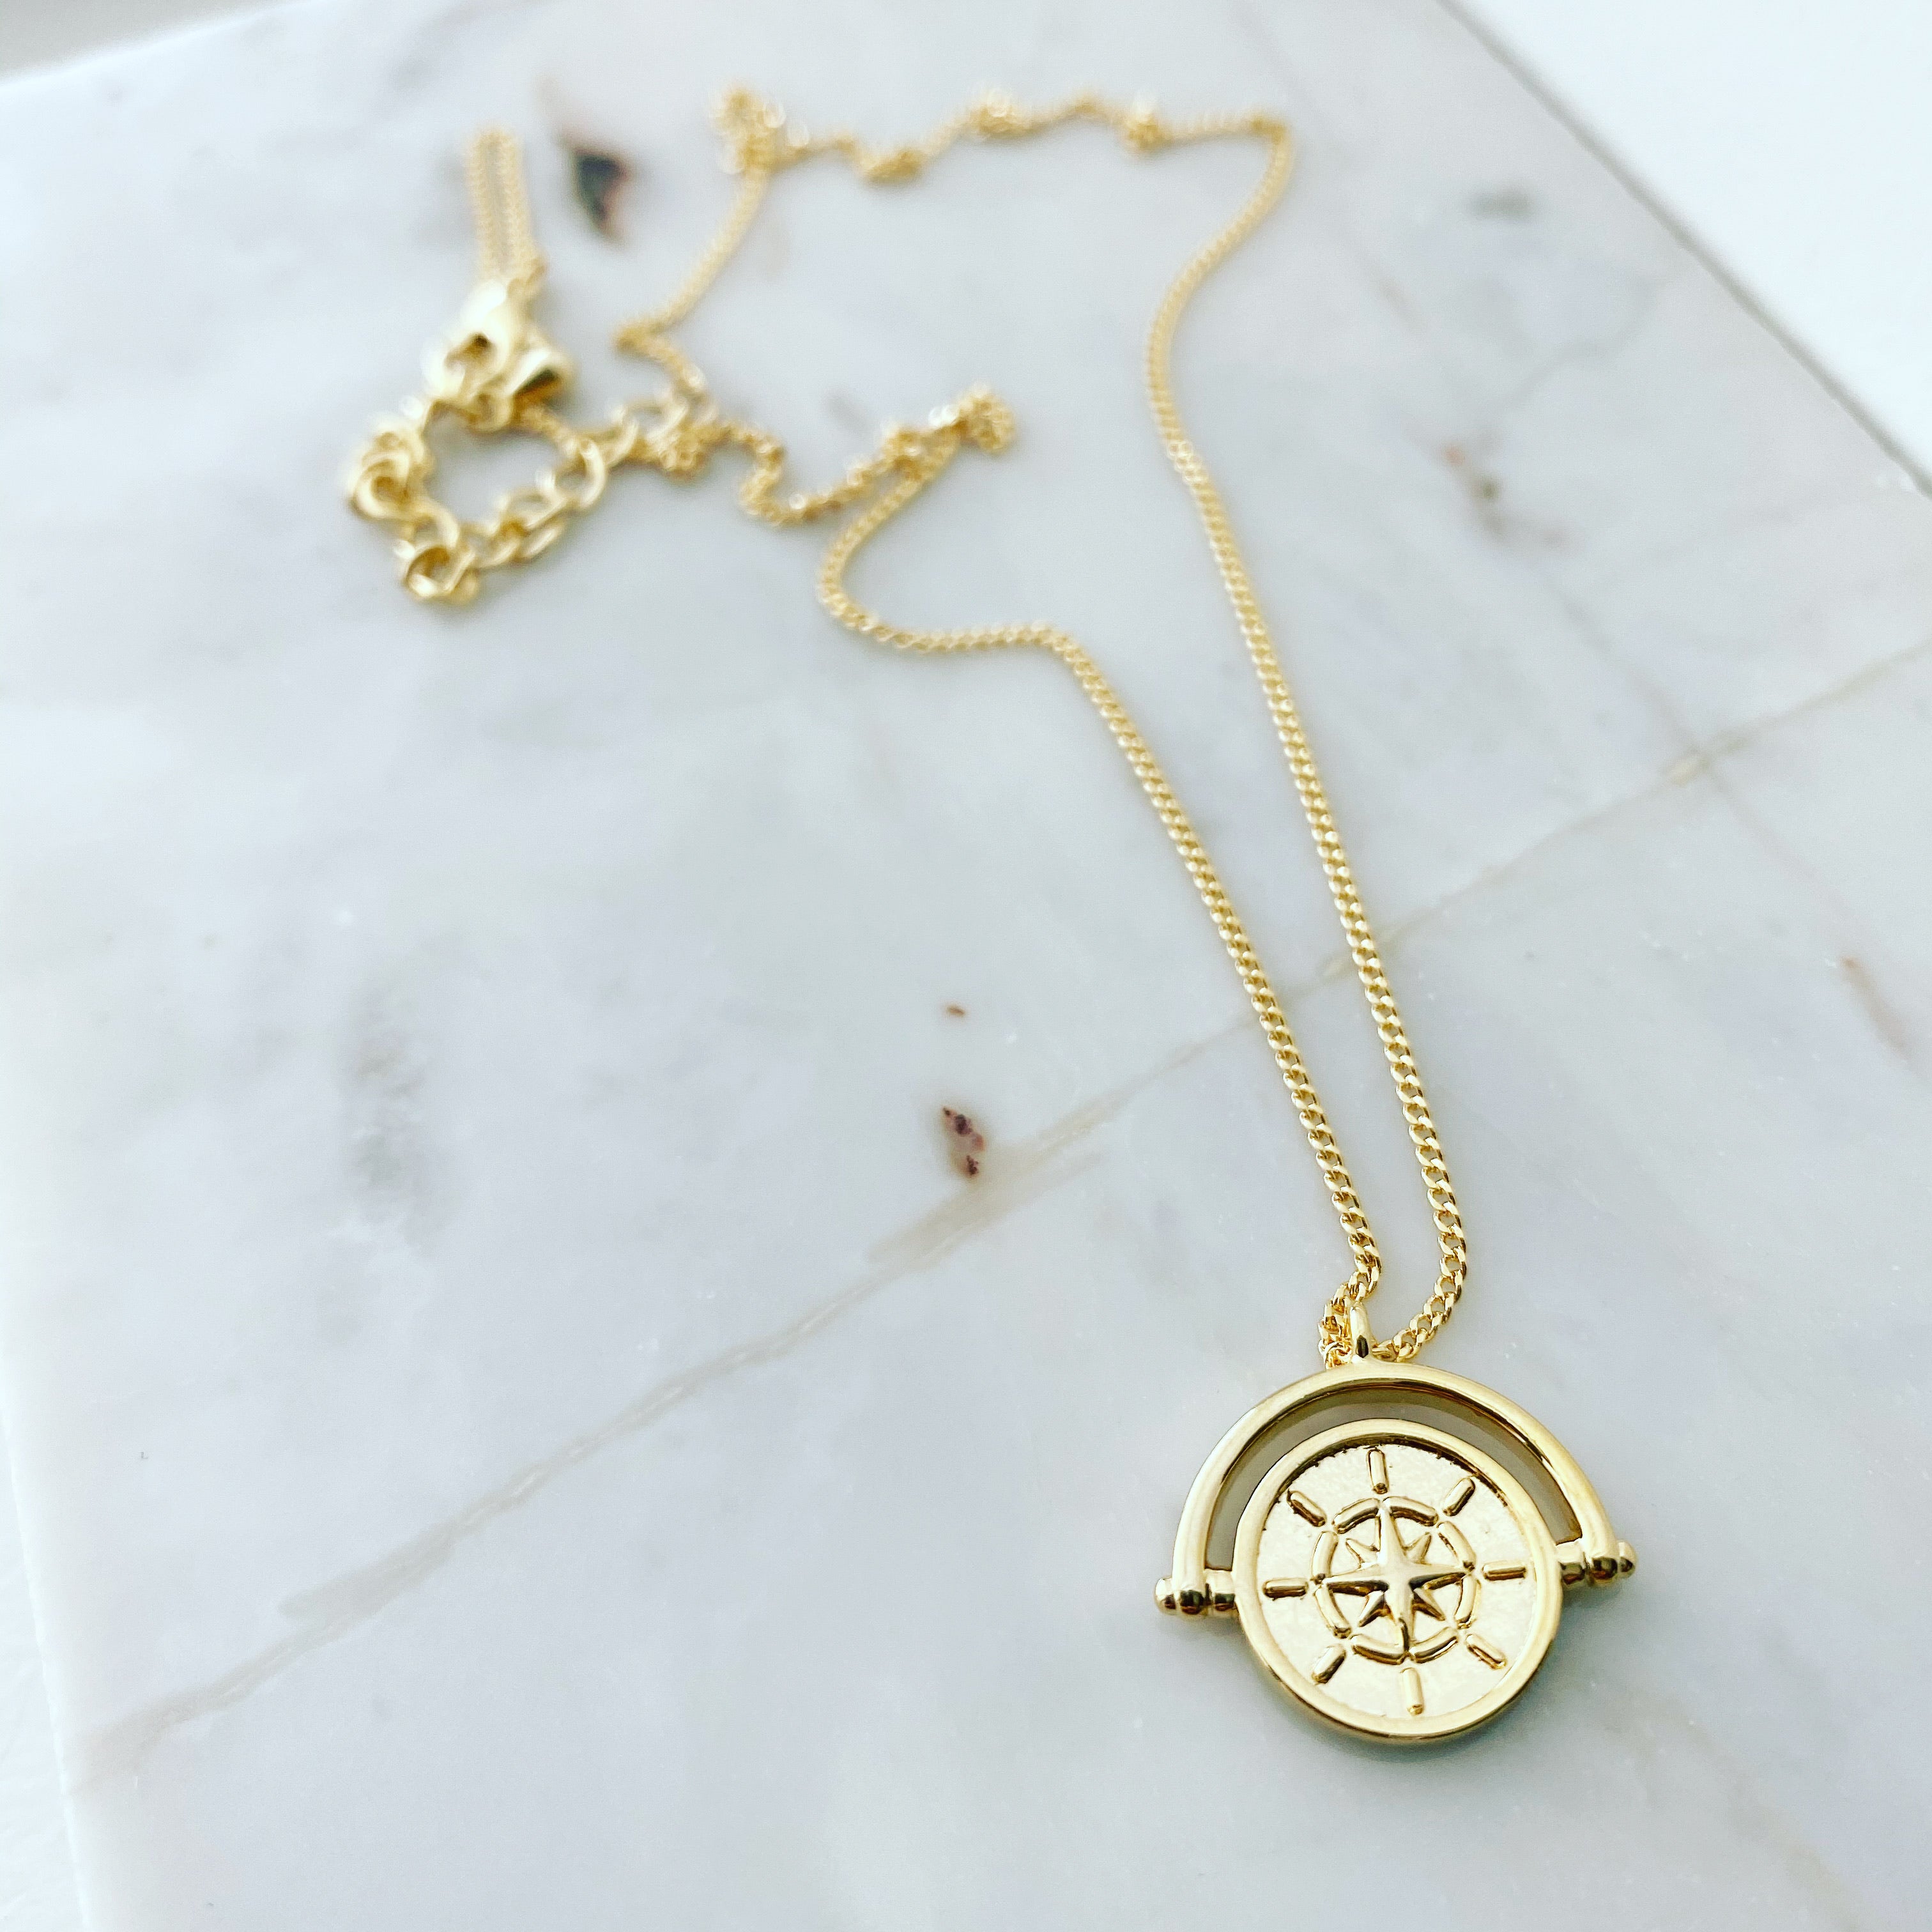 Vintage Compass Coin Necklace